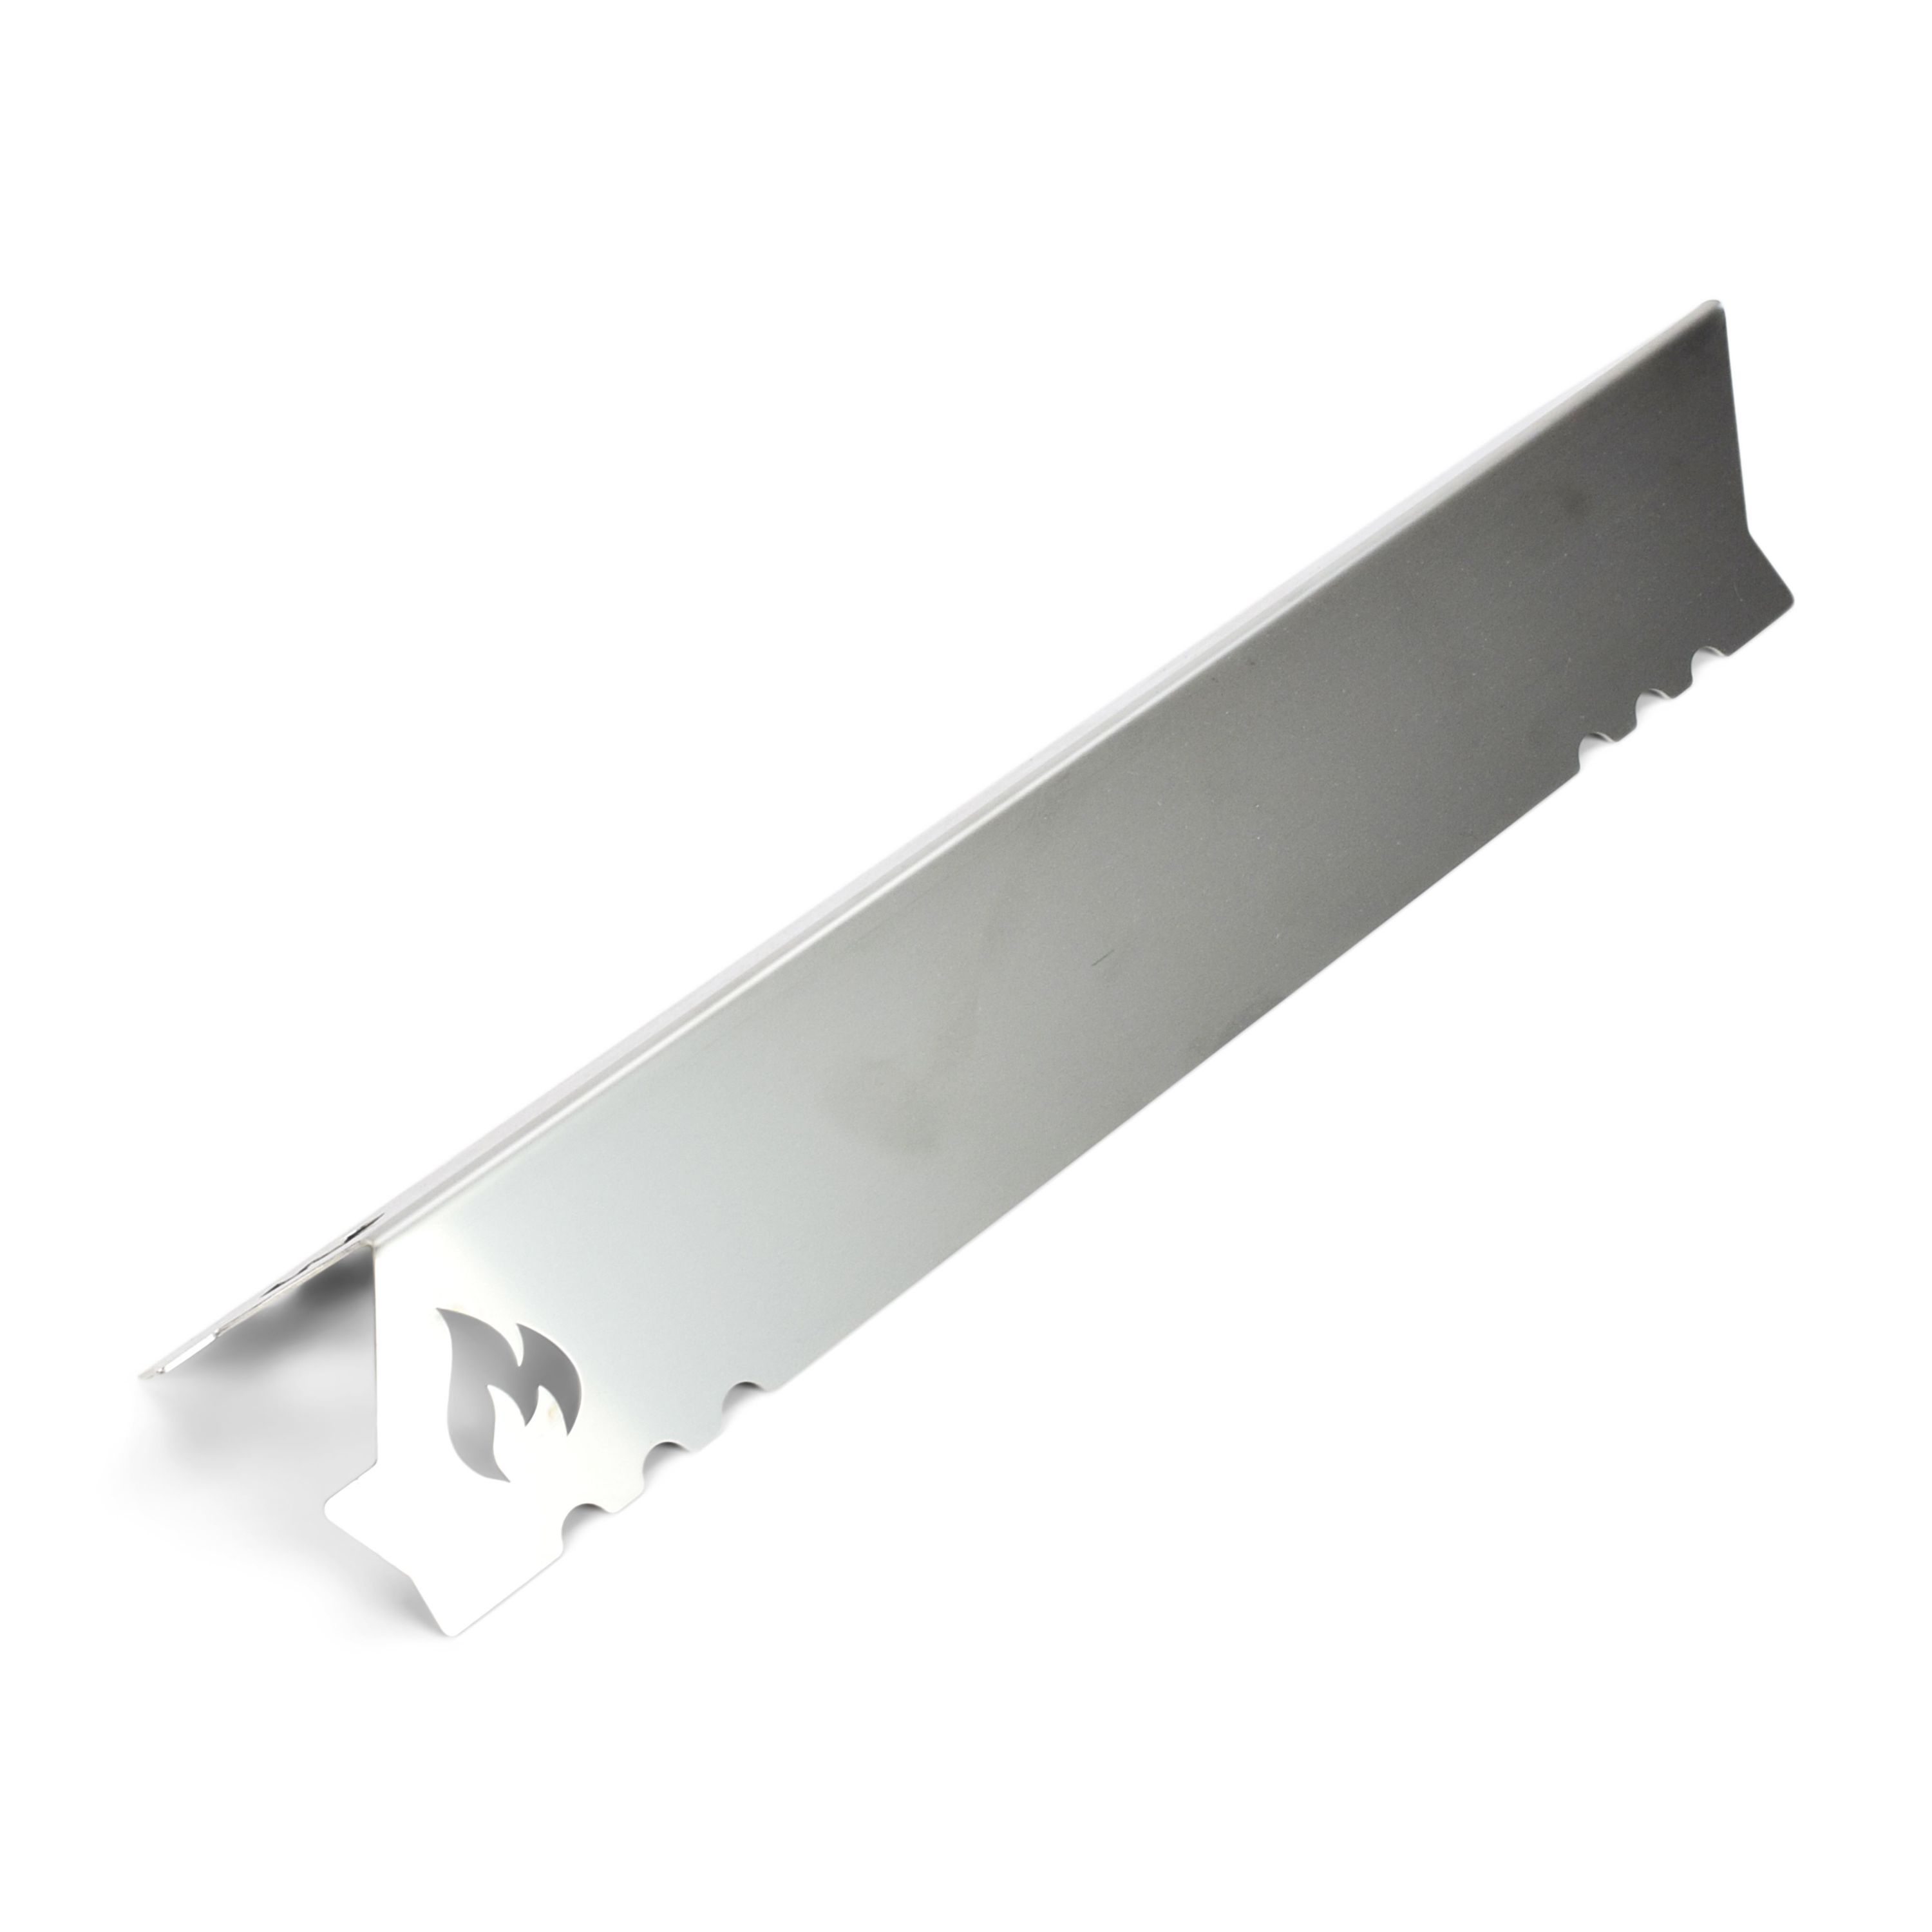 Stainless steel aroma rail for Rösle